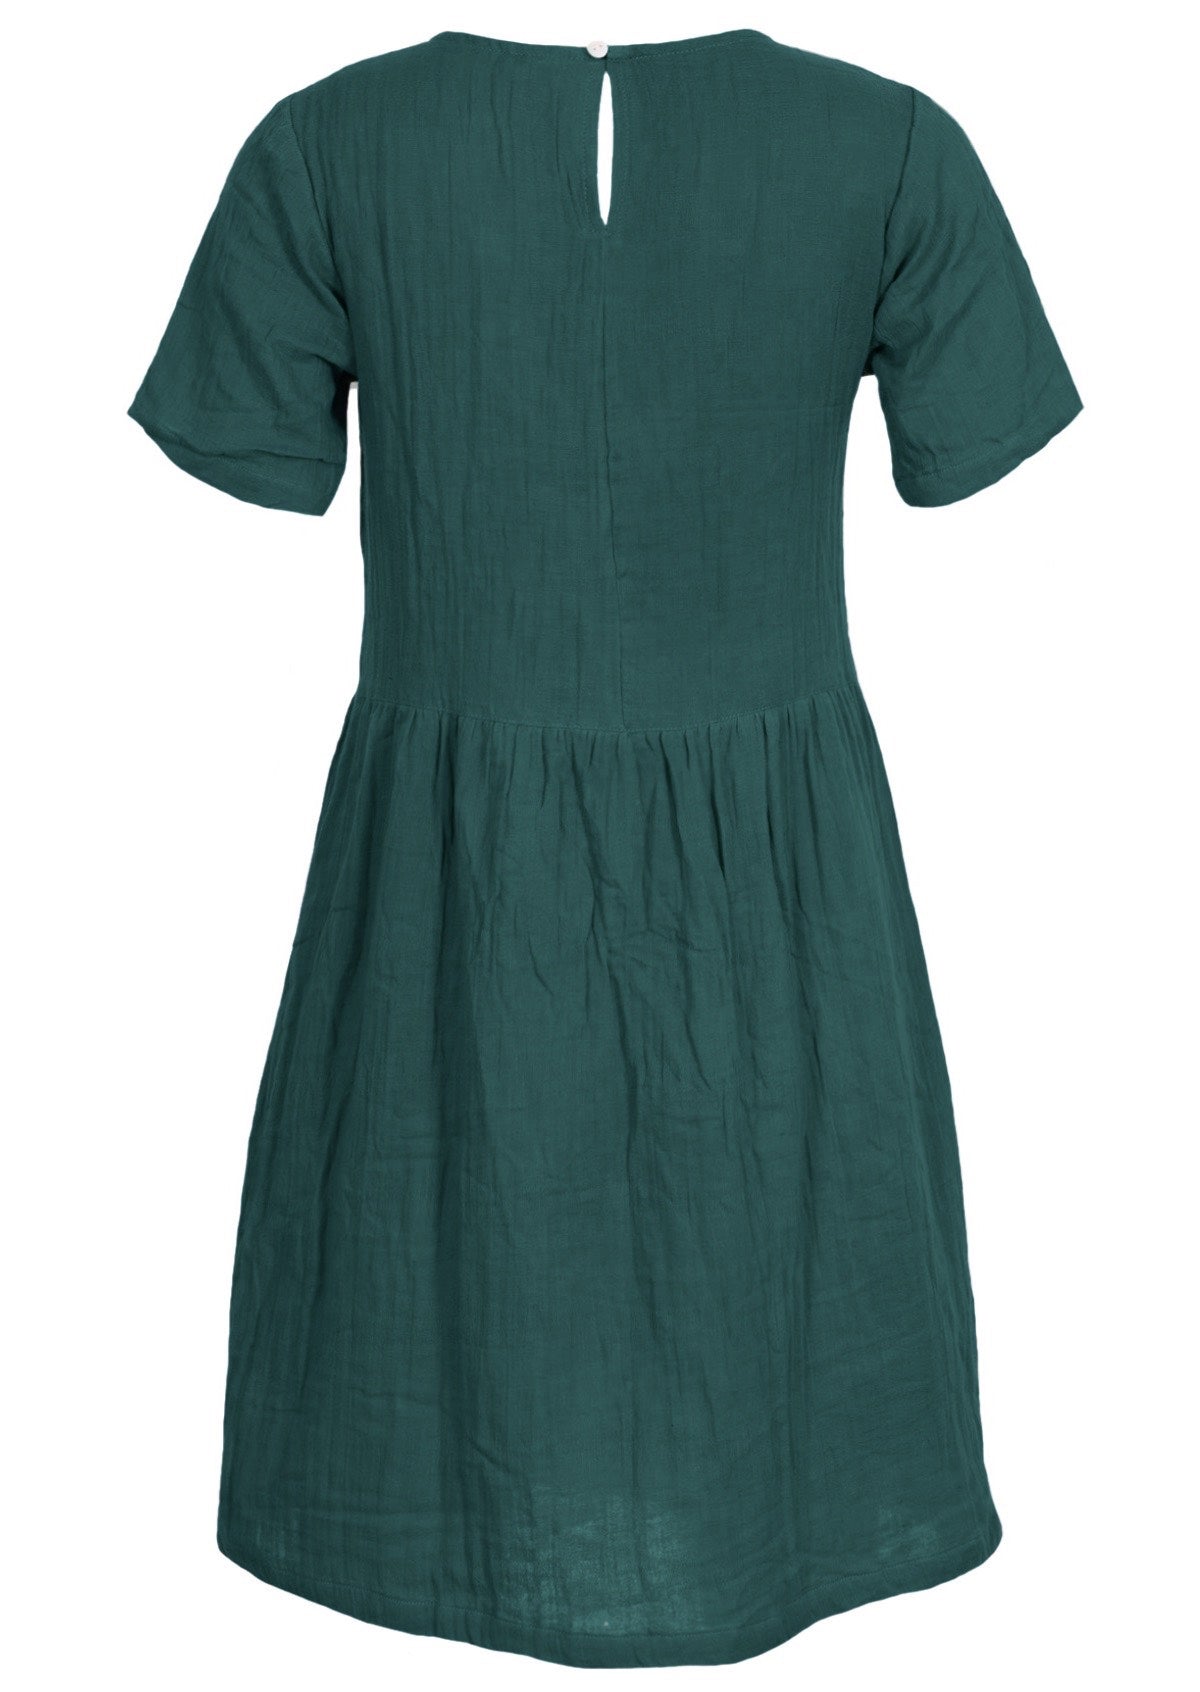 Double cotton short sleeve dress with high round neckline with button at nape of neck for ease when dressing